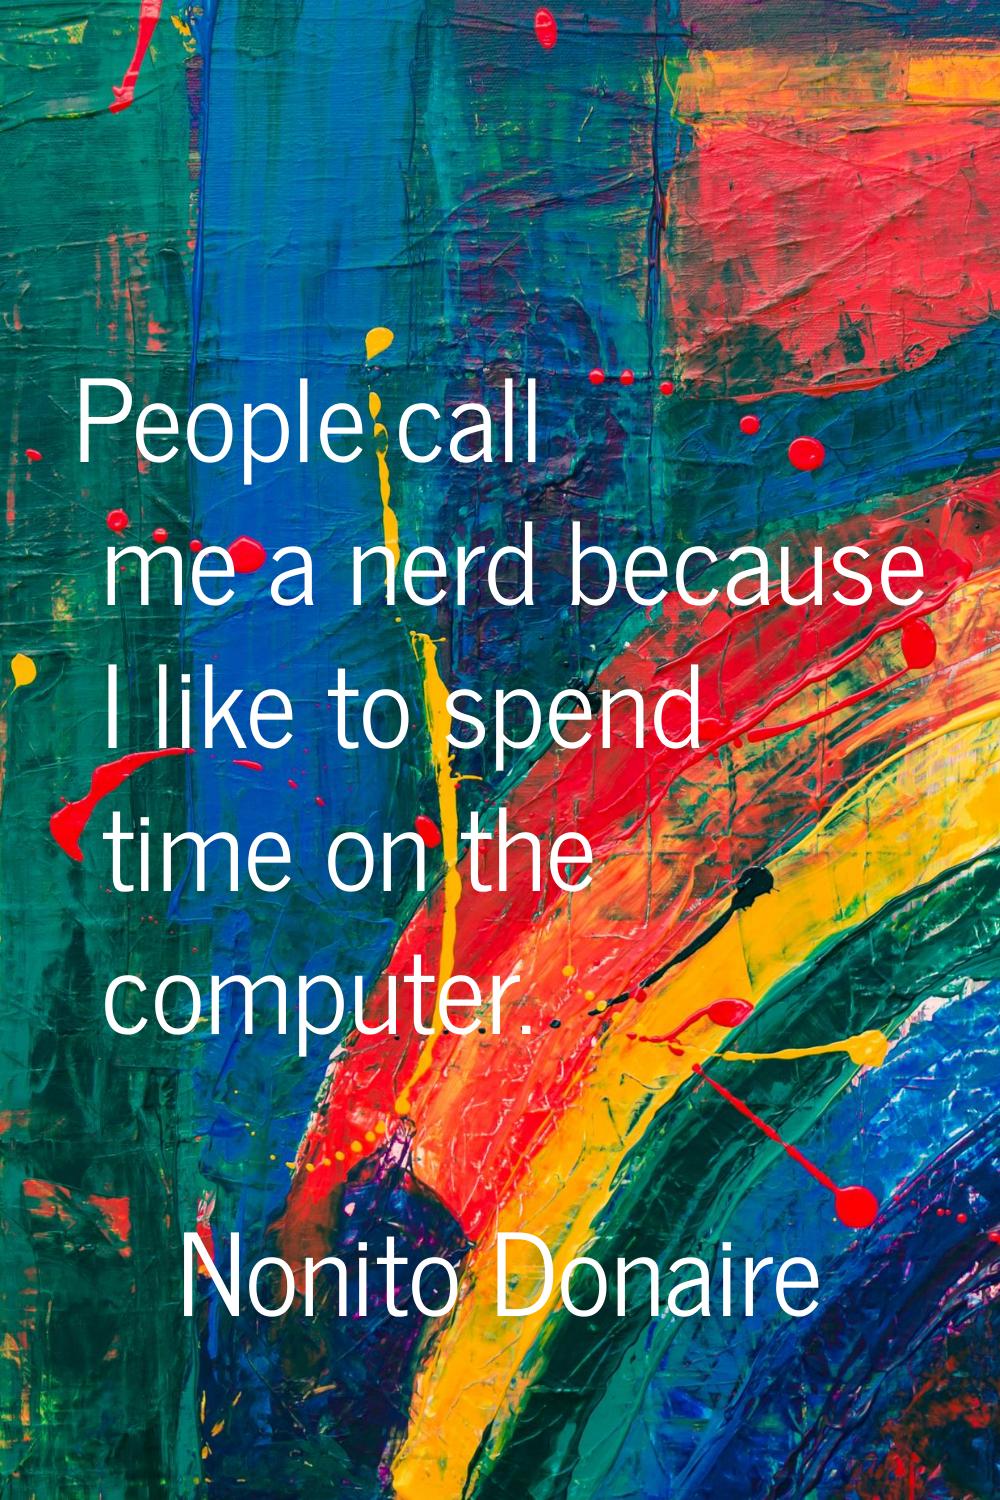 People call me a nerd because I like to spend time on the computer.